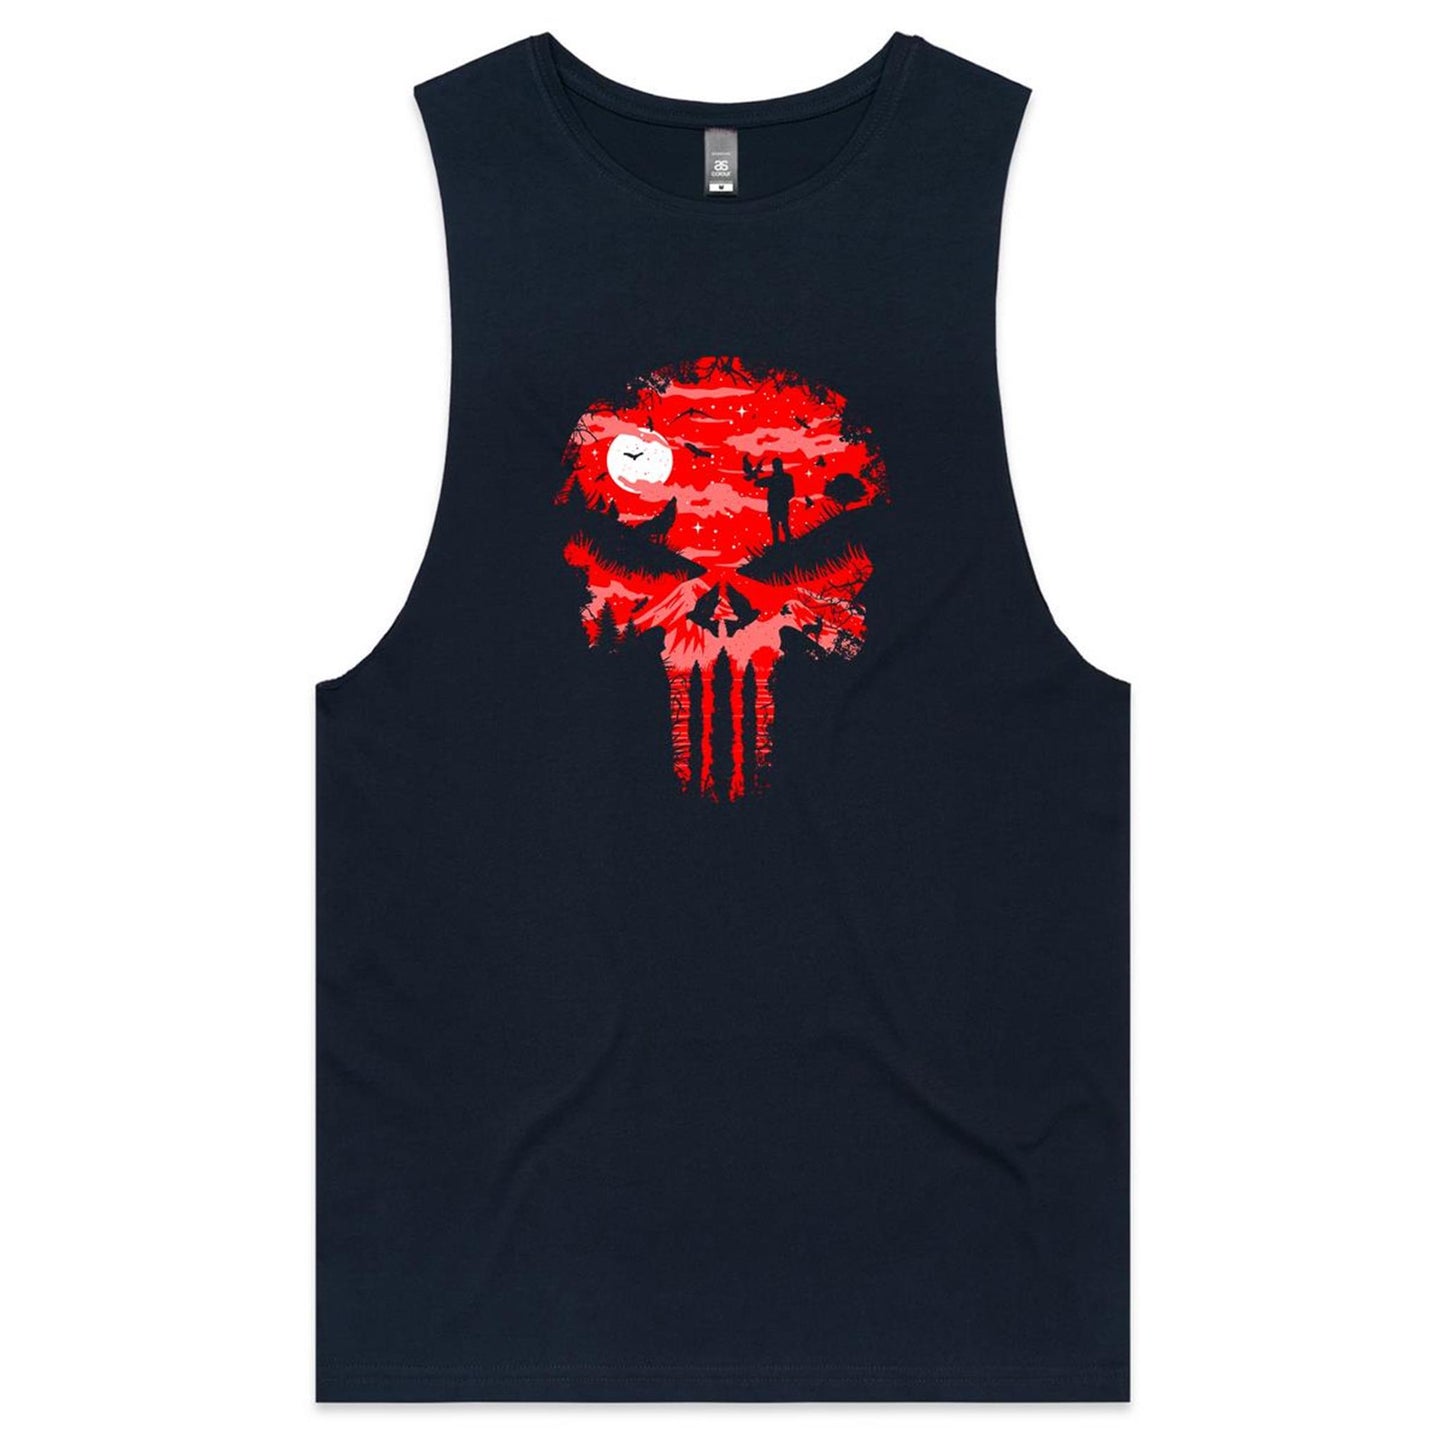 Stand and Bleed Mens Tank Top Tee